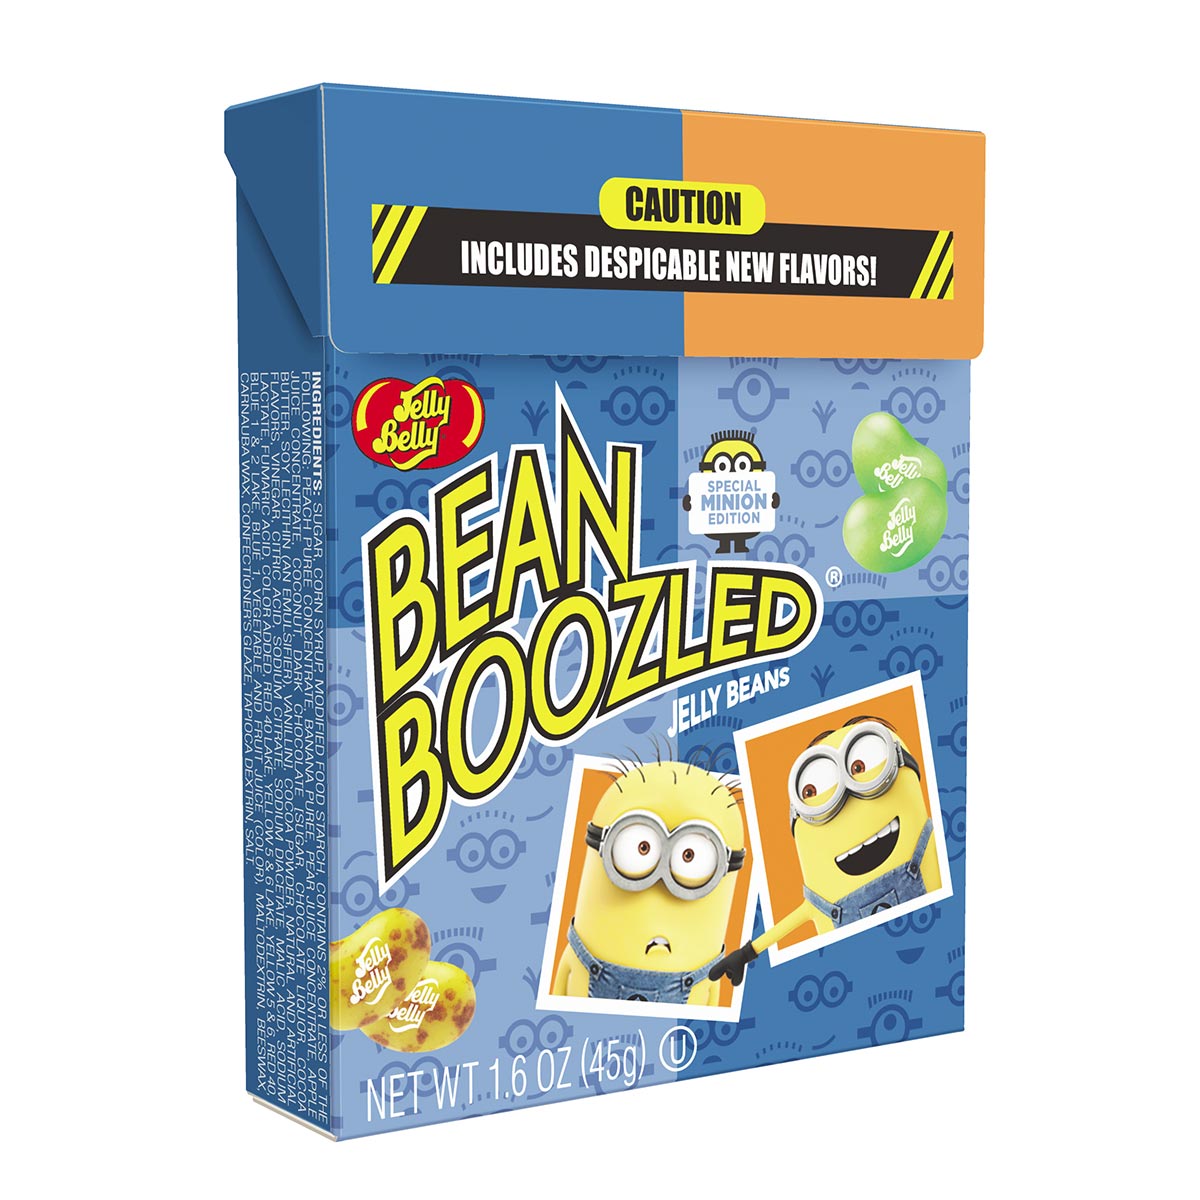   BeanBoozled   , 45  (Jelly Belly 79900)